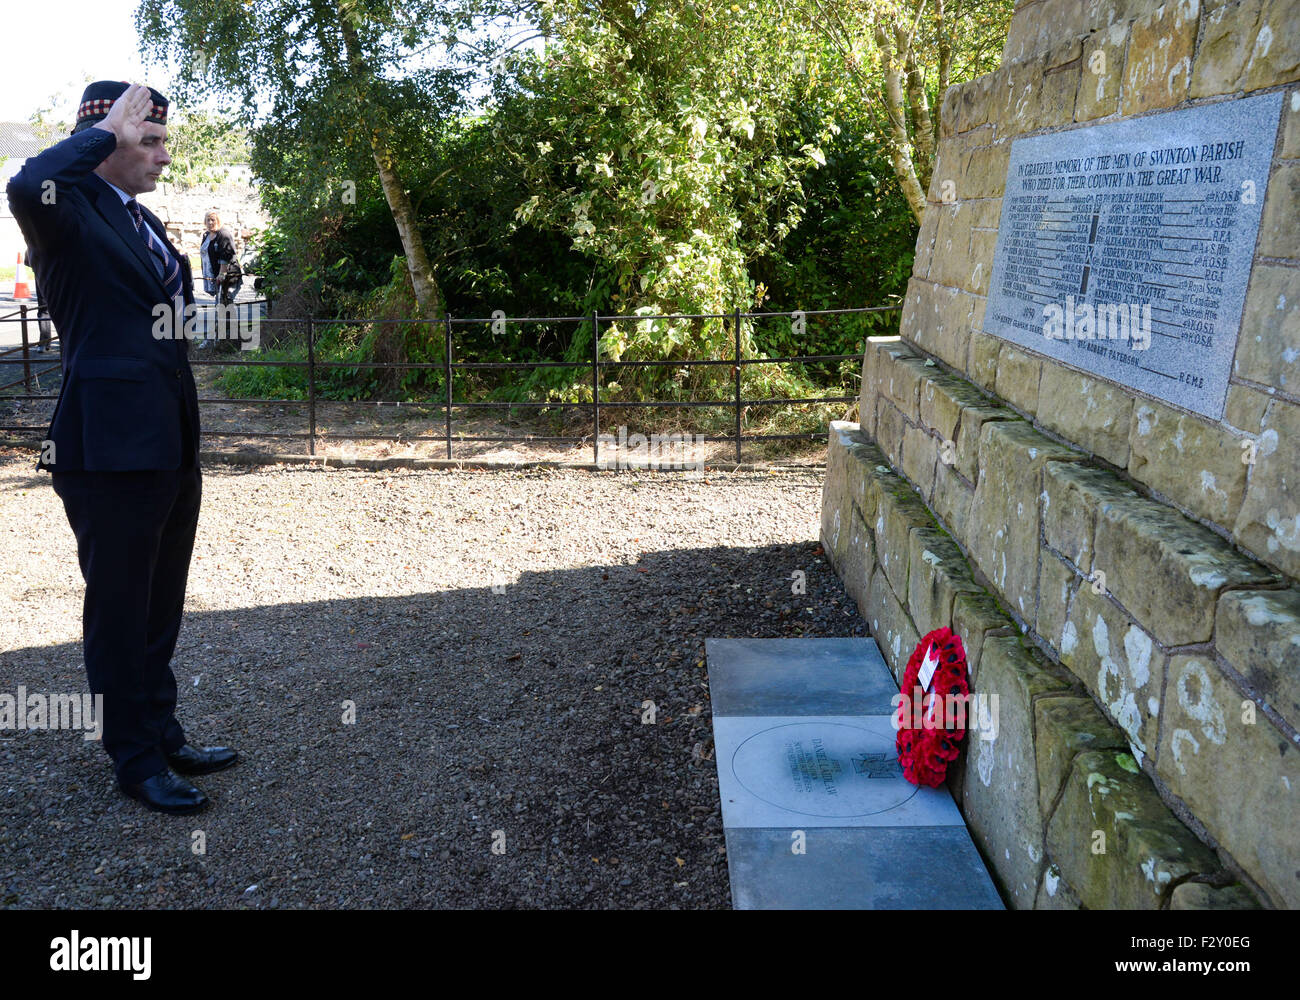 Swinton, UK. 25th Sep, 2015. Colonel AJ Loudon   The Laying of the Commerative VC Stone in the small Scottish Border village of Swinton to mark the 100th Anniversary of the award of the Victoria Cross to Piper Daniel Laidlaw for his actions whilst serving with the 7th Battalion of the King's Own Scottish Borderers.   Daniel Logan Laidlaw was born at Little Swinton, Berwickshire on 26 July 1875 and joined the Army in 1896. He served with the Durham Light Infantry in India where he received a certificate for his work during a plague outbreak in Bombay in 1898. Stock Photo